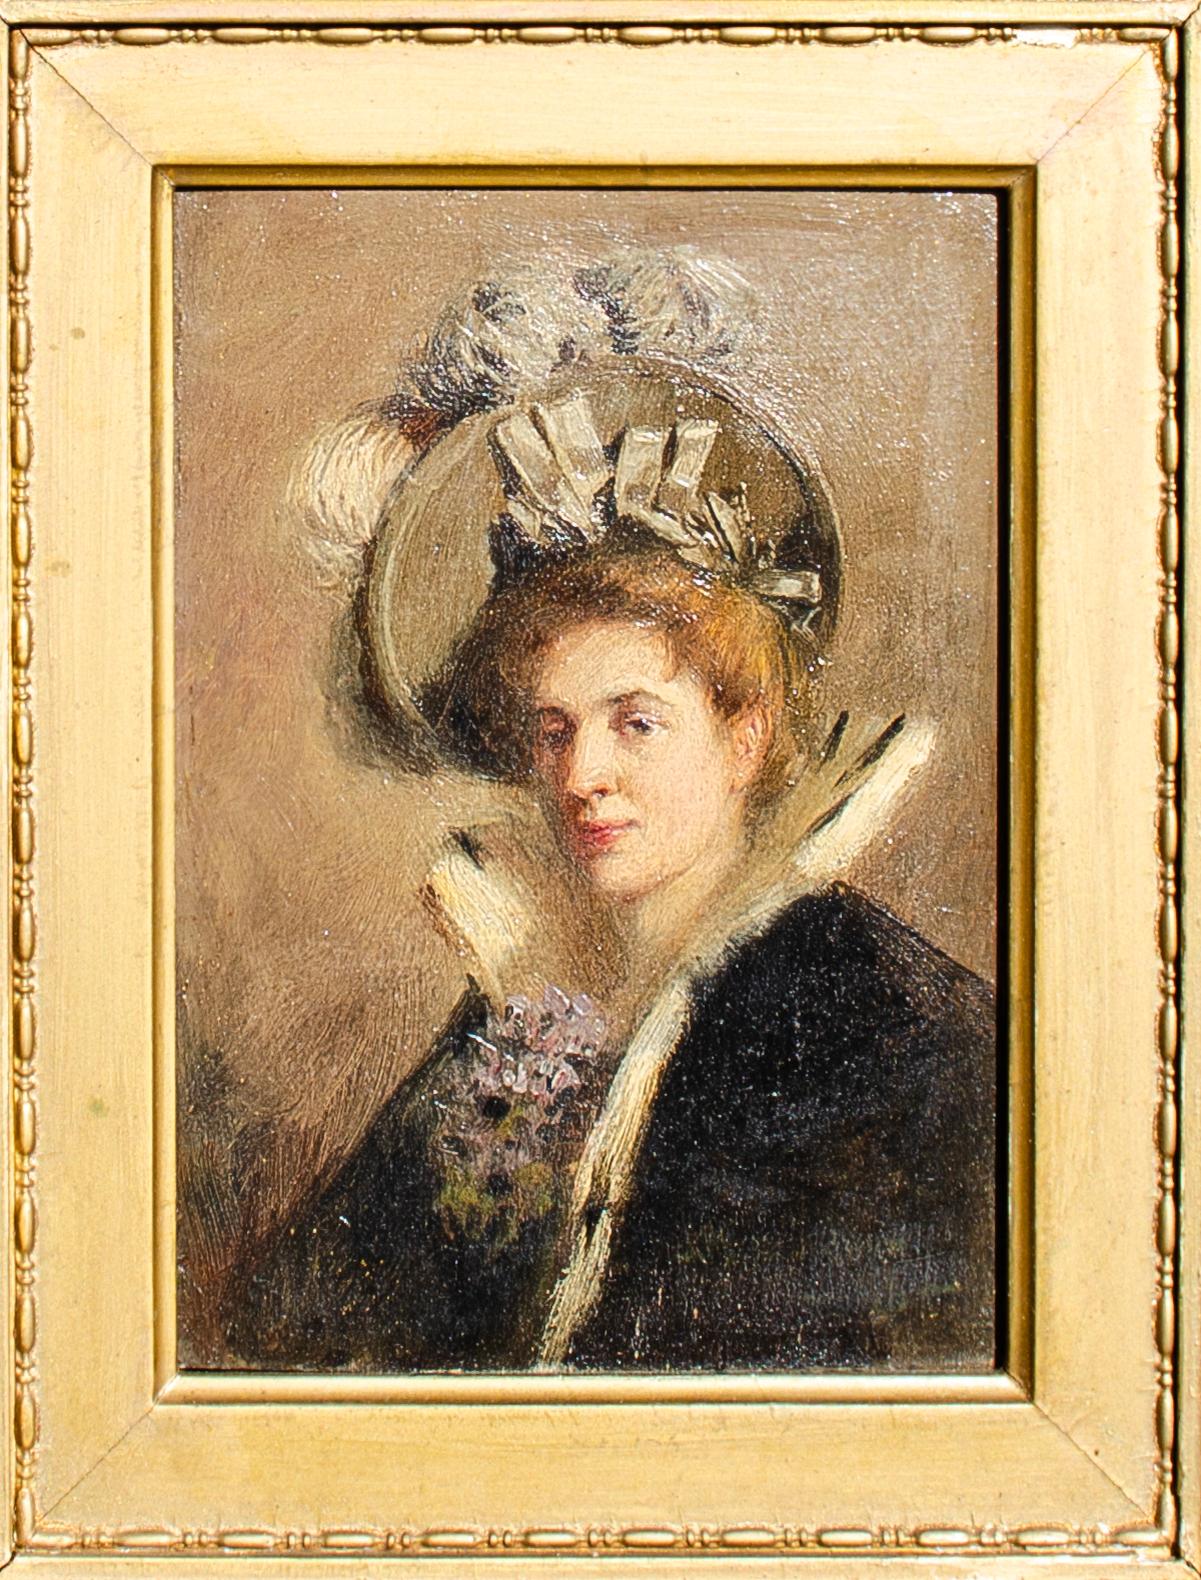 James Allen St. John (American, 1872-1957)
Portrait of a lady, Early 20th Century
7 3/4 x 5 1/4 in.
Framed dimensions: 17 1/2 x 15 x 3in.

James Allen Saint John was born in Chicago, Illinois on October 1, 1872.  James was the son of artist Susan St